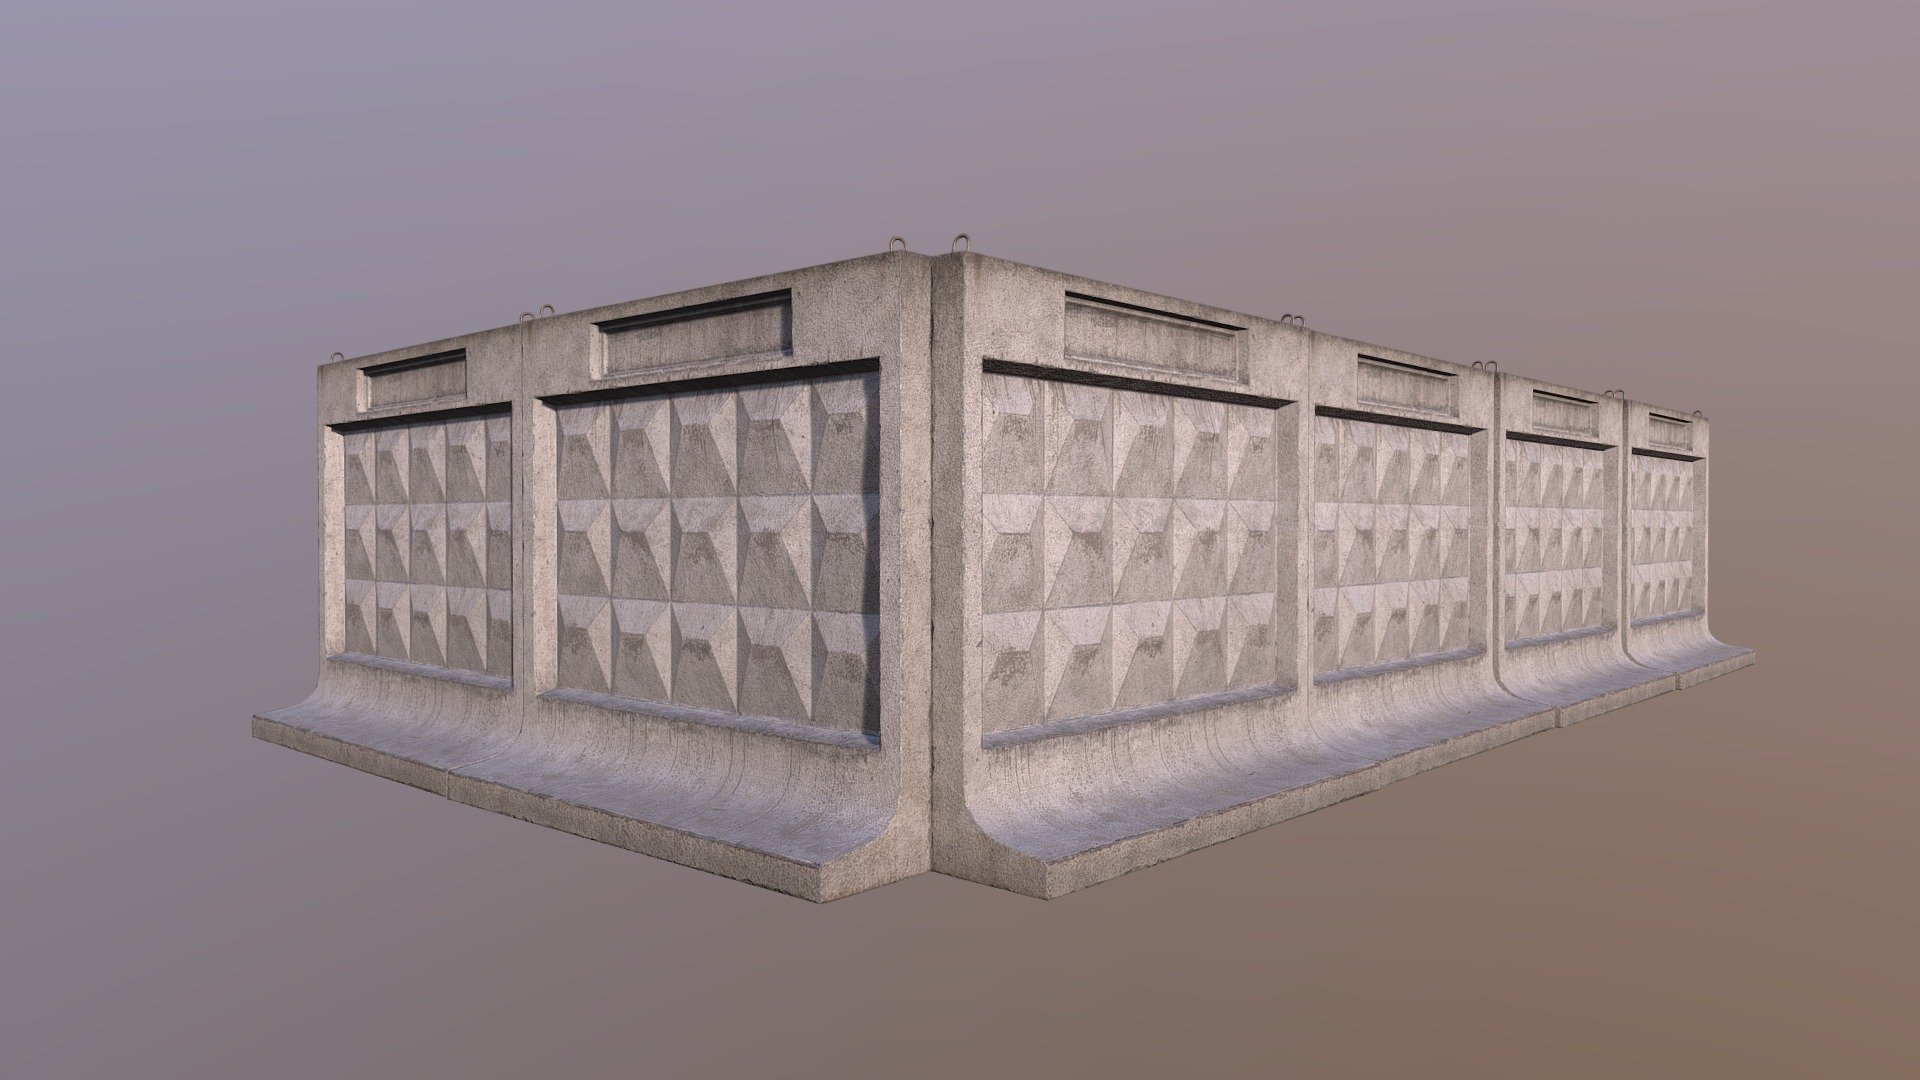 Soviet self-stand fence EO-2.5 (Element Ograzhdeniya-2,5 meters) with square relief

Polycount: 648 tris, 512 verts, 2048 texture
 - Soviet self-stand fence EO-2.5 - 3D model by Aleksey Kozhemyakin (@aleksey-k) 3d model